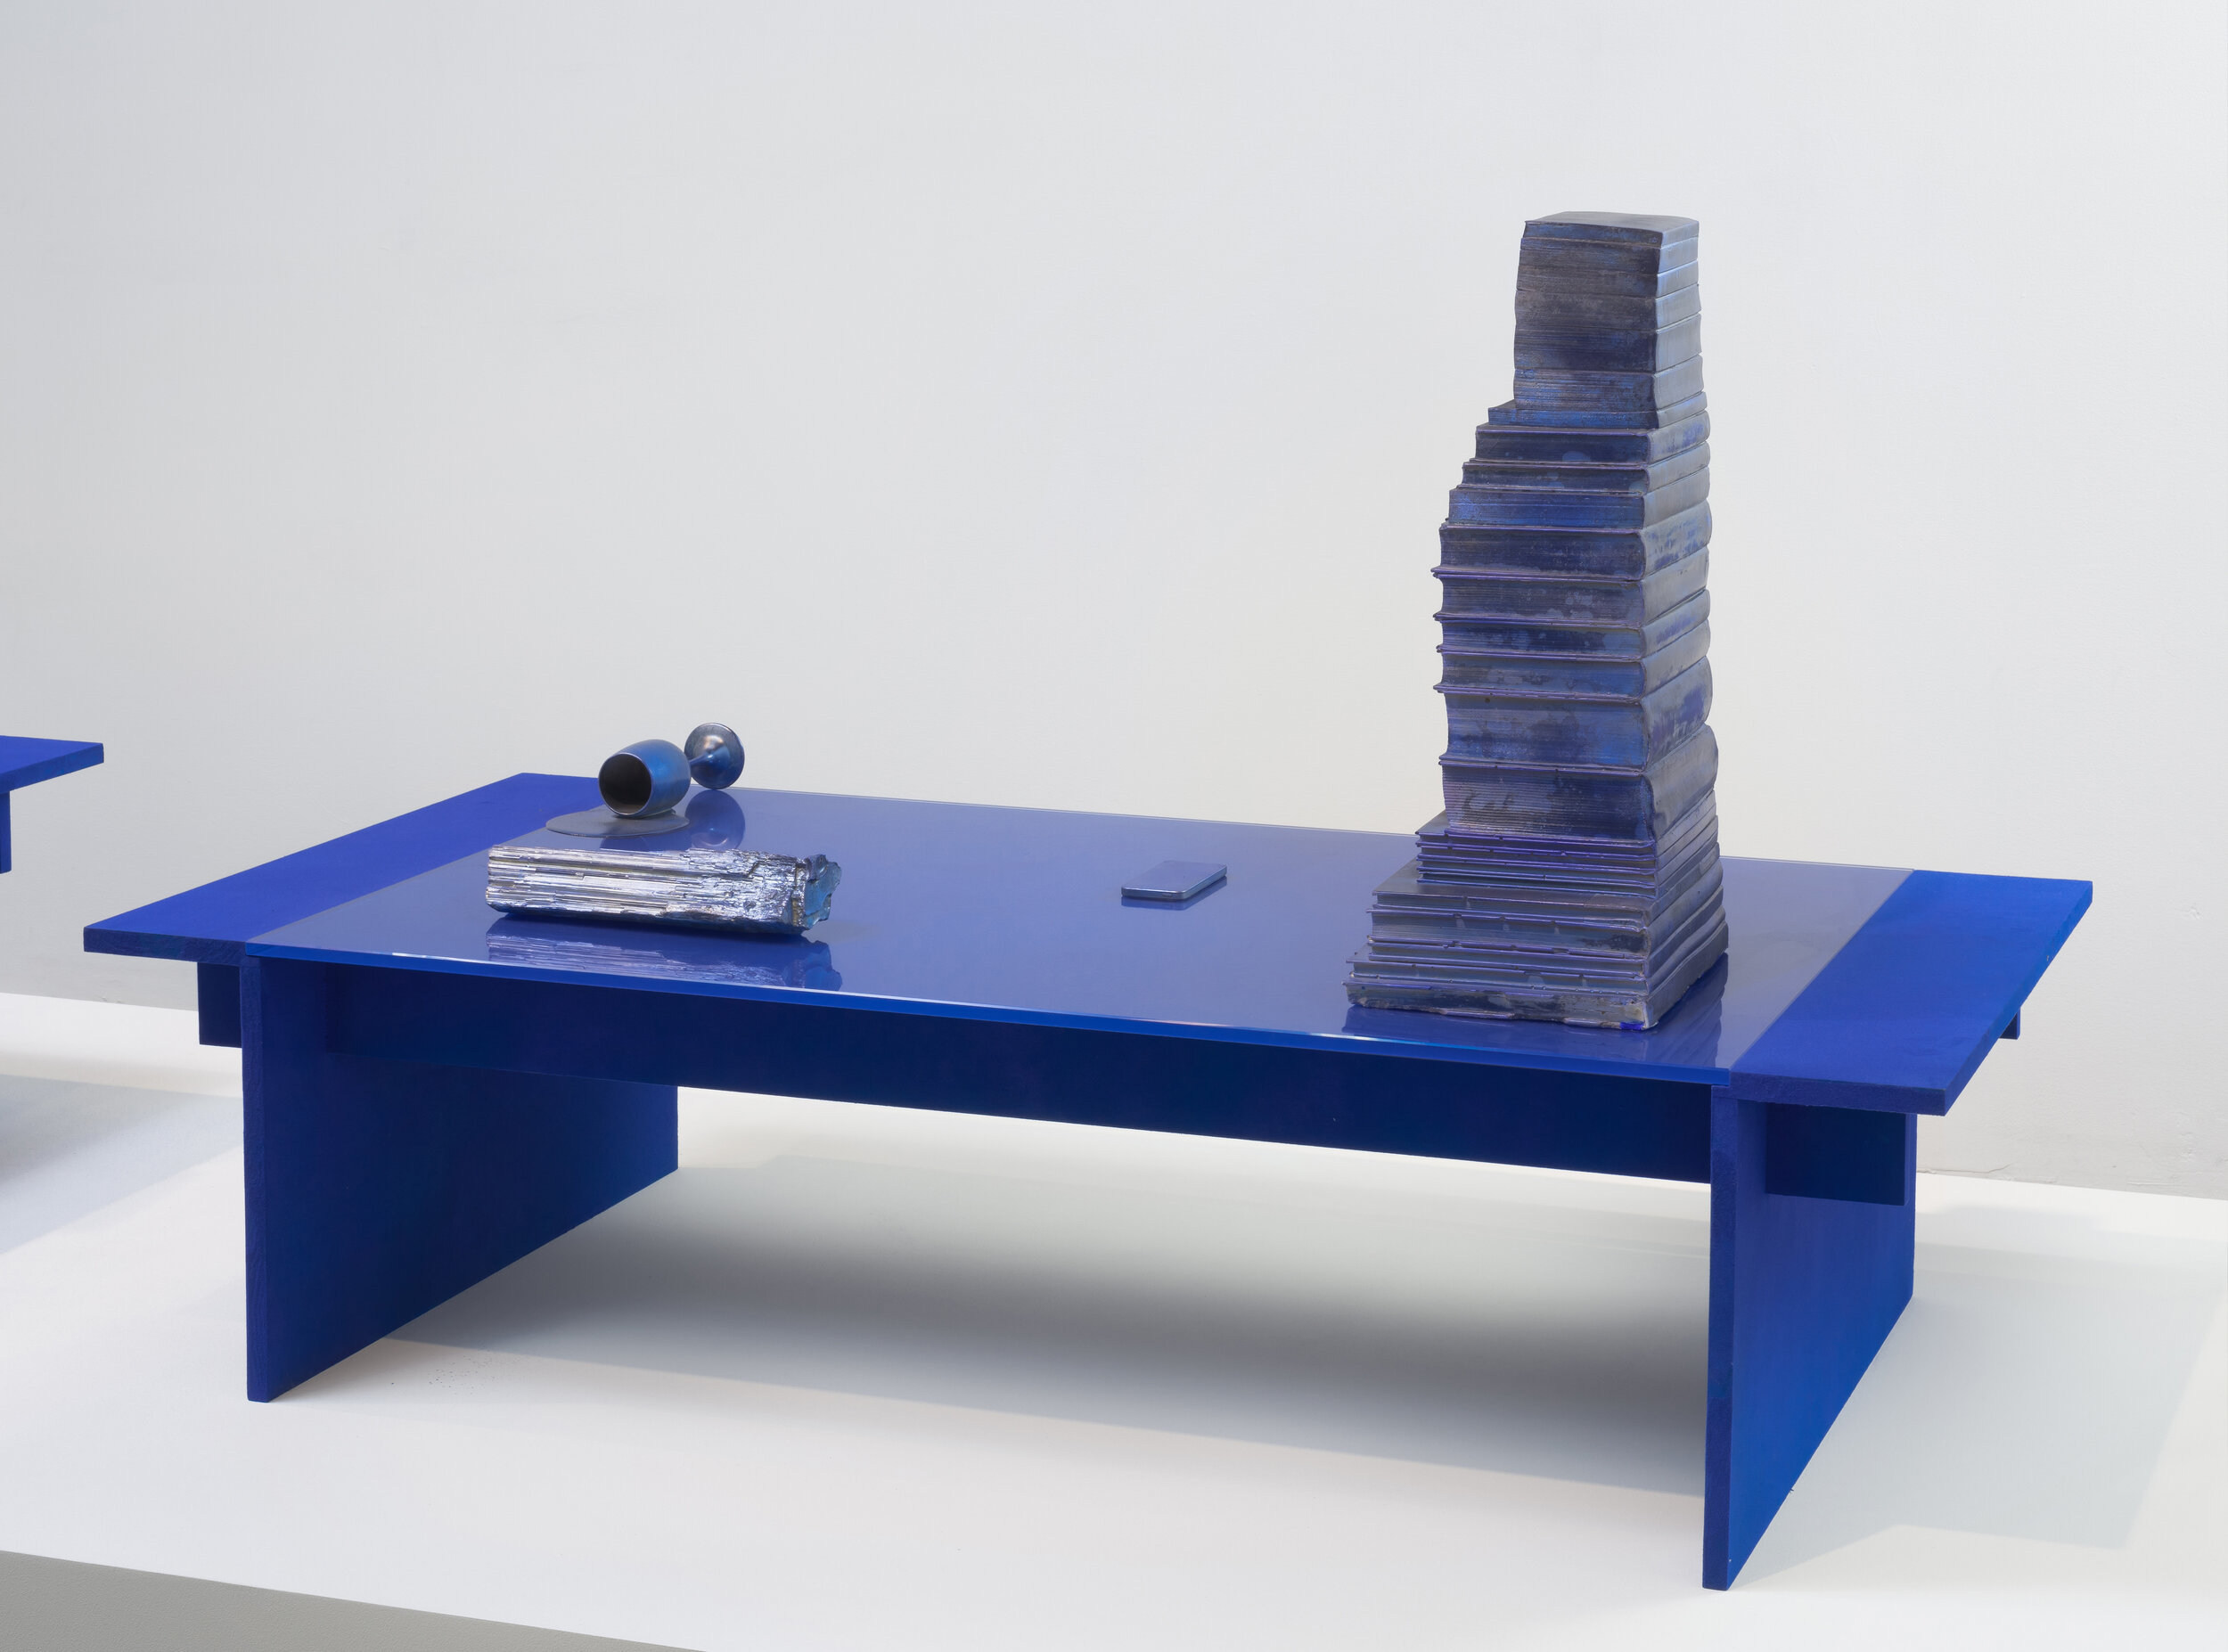   Coffee Table in Ultramarine with Objects,  2014. Wood, flocking, glass, hydrocal, and various store bought goods. 60 x 30 x 38 inches 